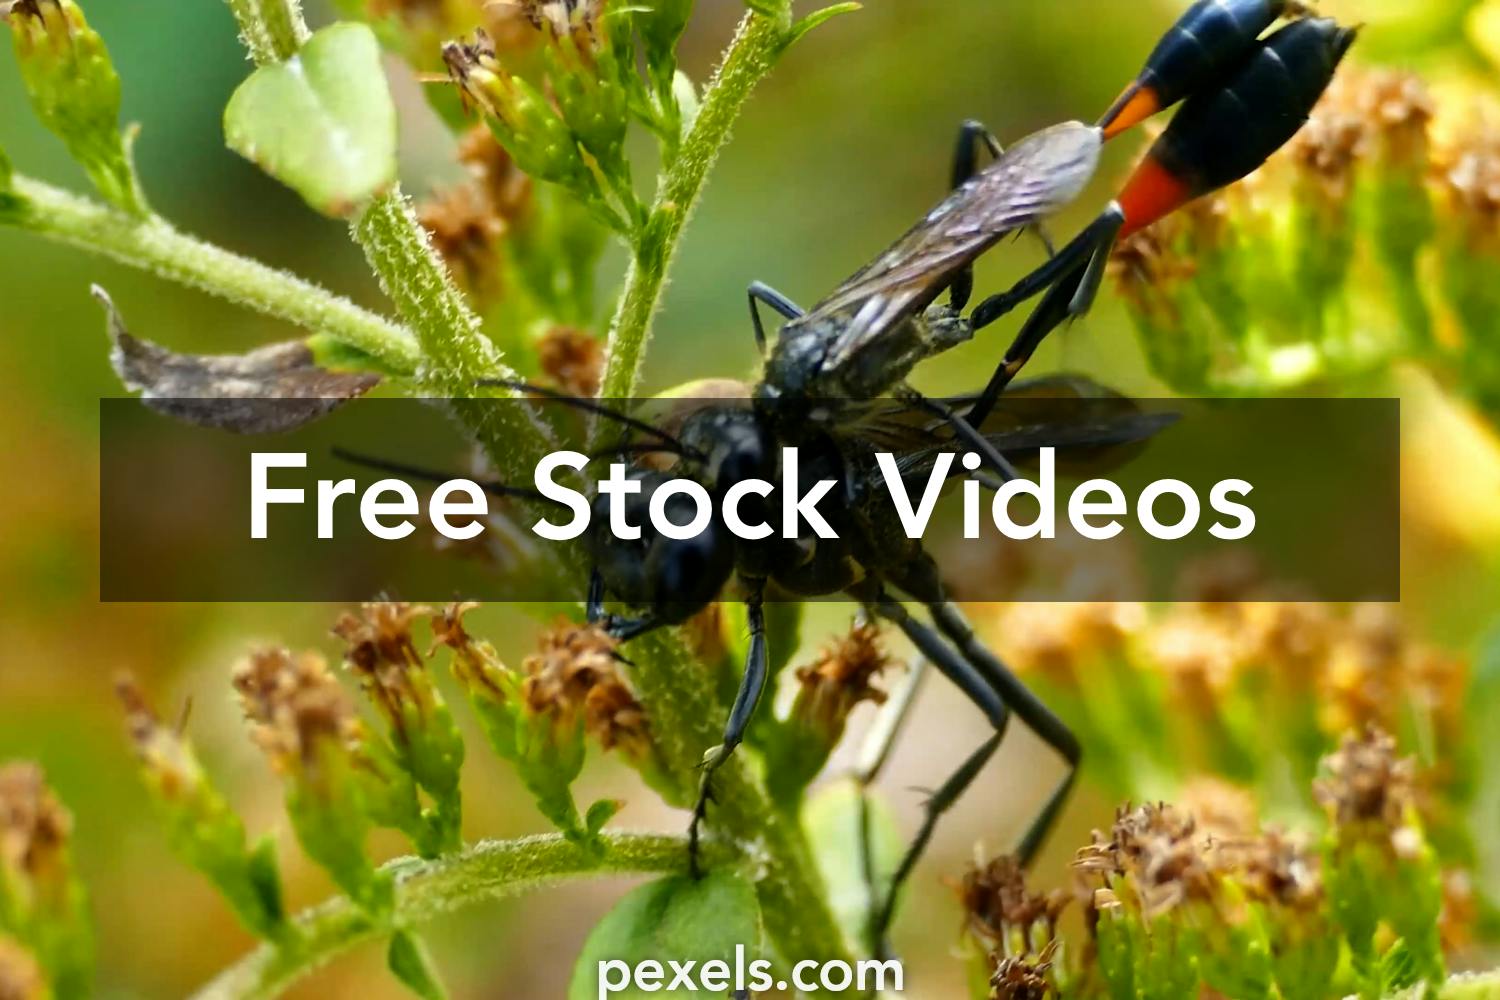 Animal Mating Videos, Download The BEST Free 4k Stock Video Footage & Animal  Mating HD Video Clips